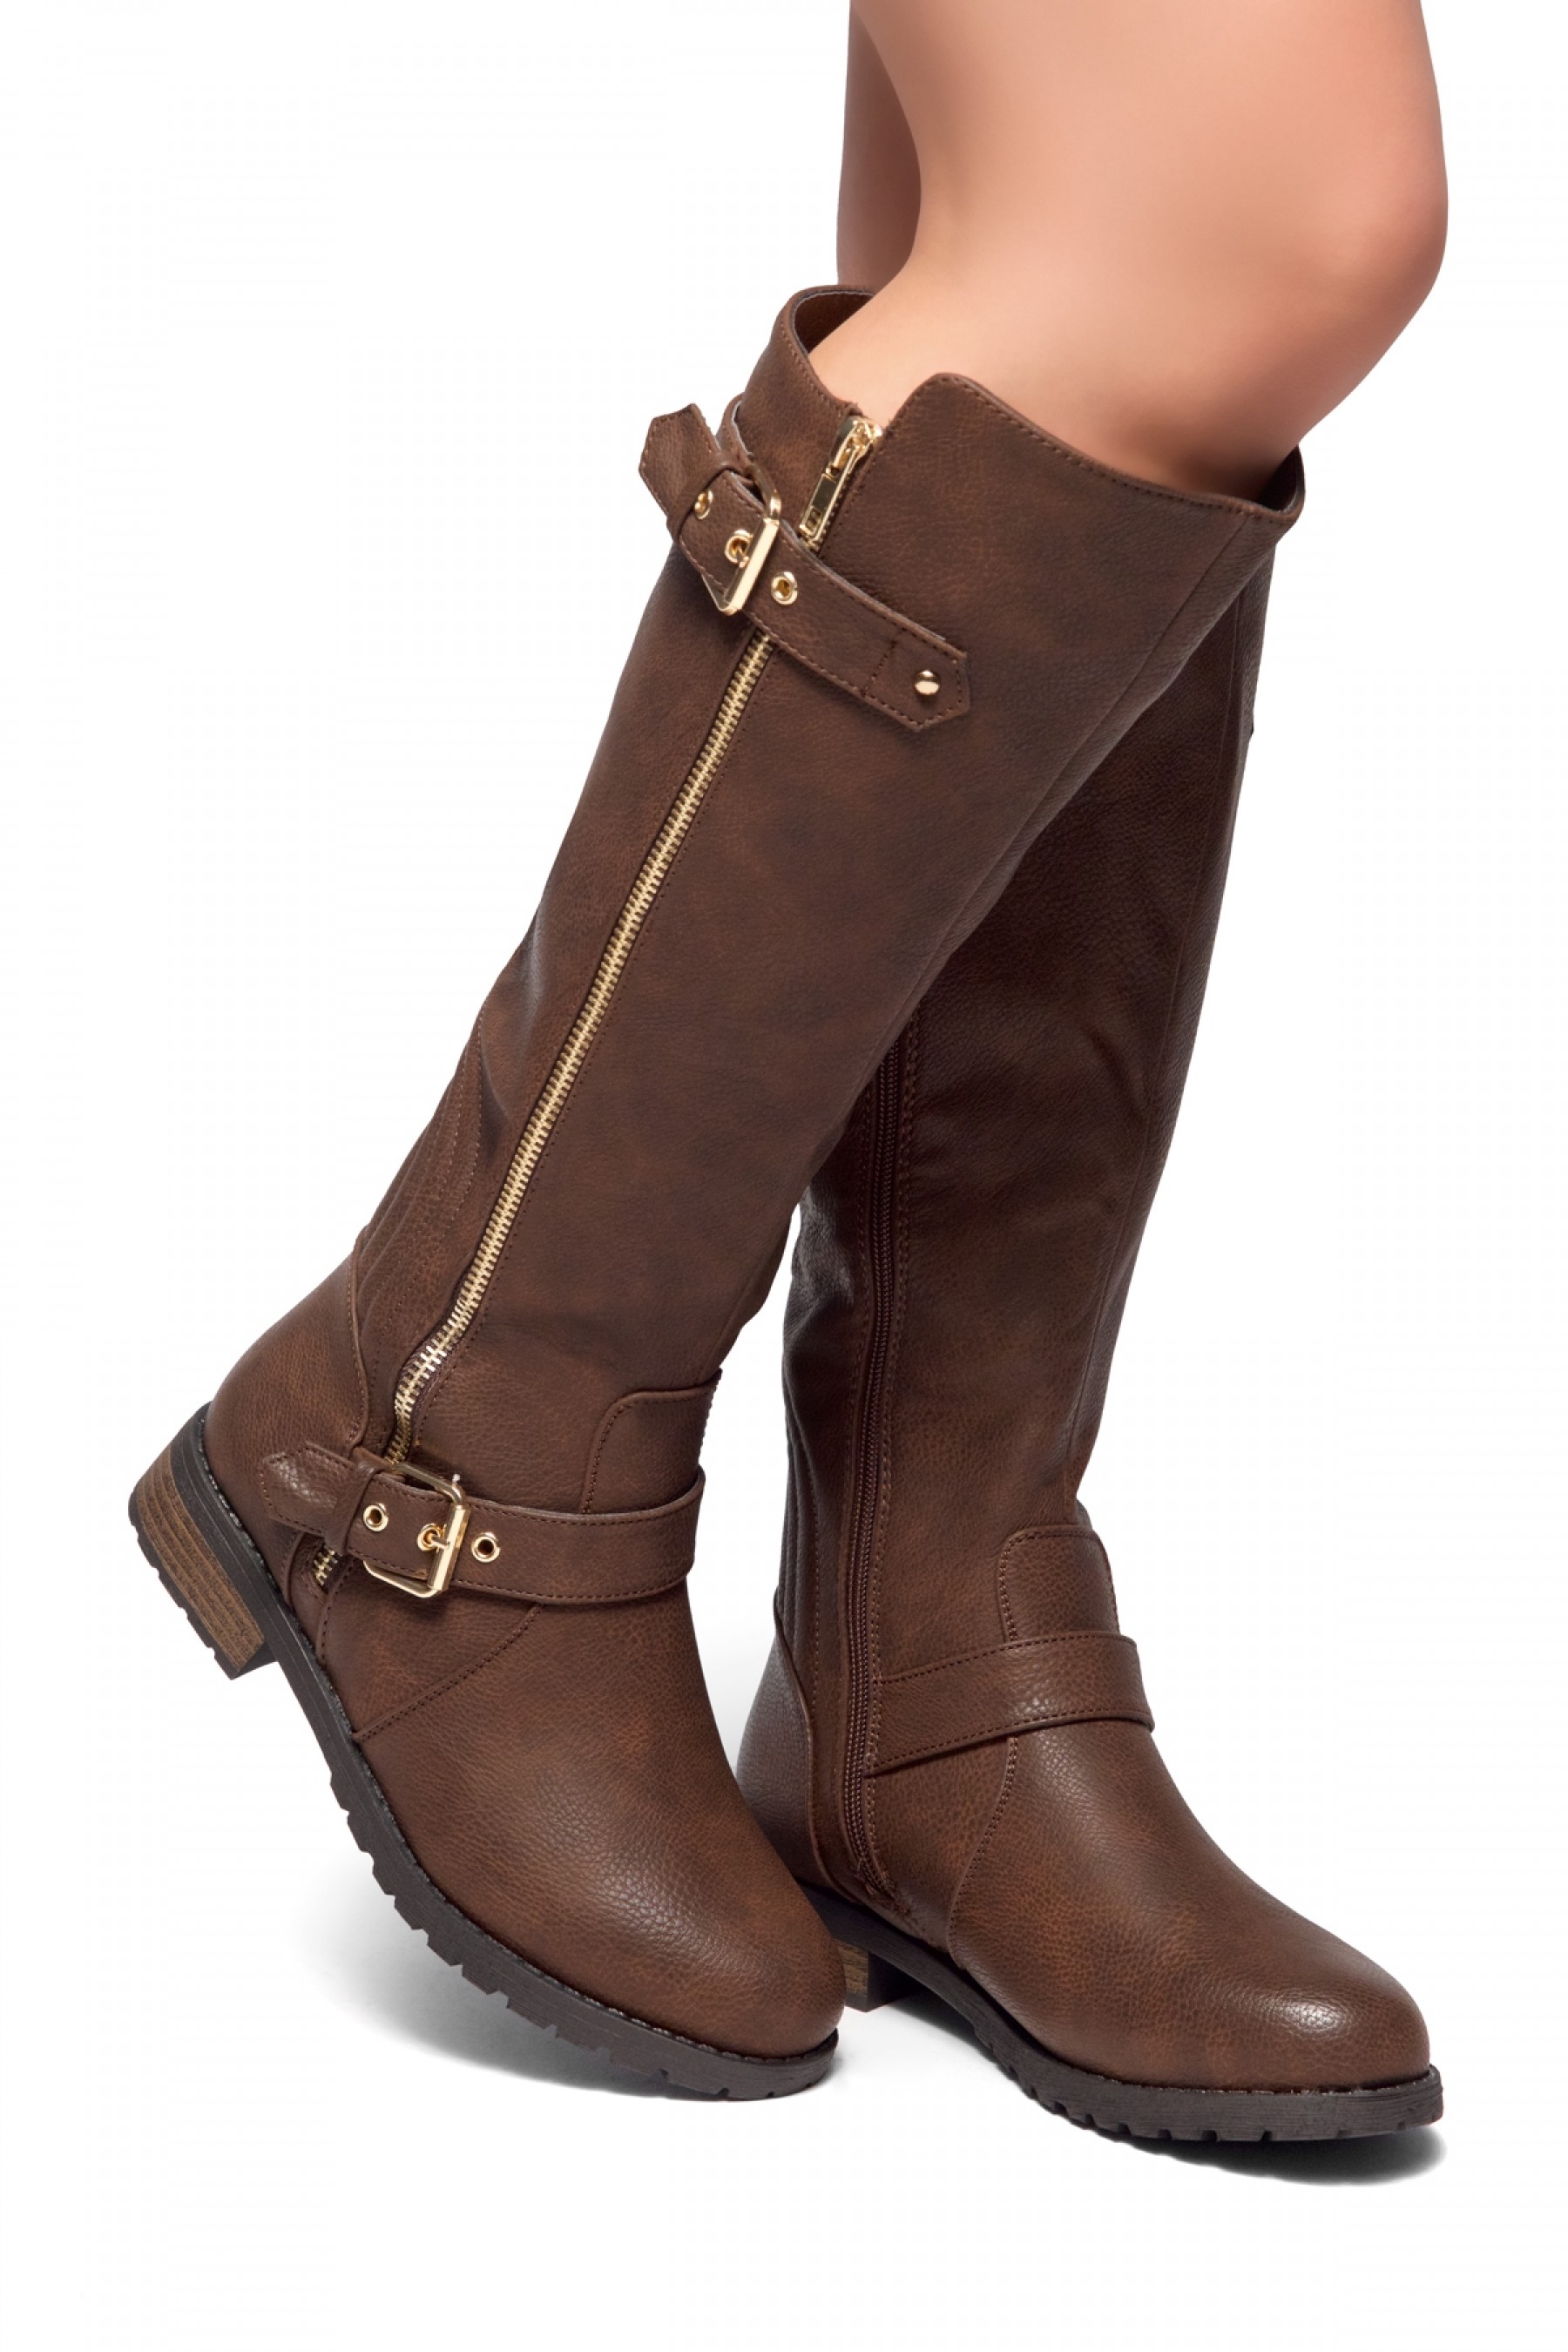 BROWN BOOTS herstyle city runaway-zipper trim, buckle detail riding knee high boots ( brown) TPGYIXI